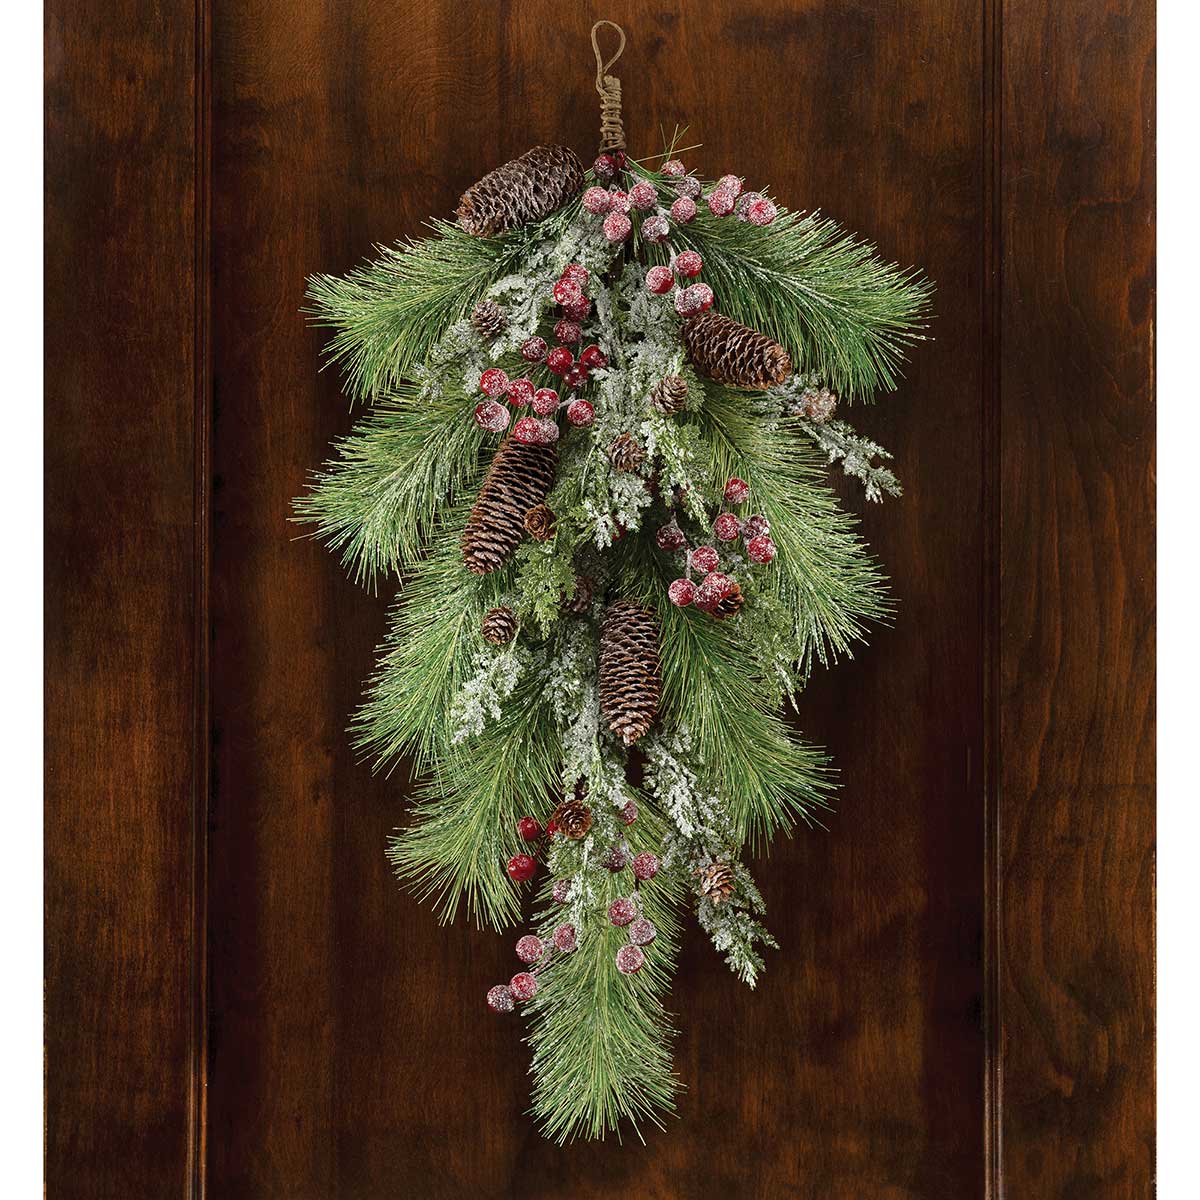 FROSTED RED BERRY/PINE BOUGH WITH PINECONES